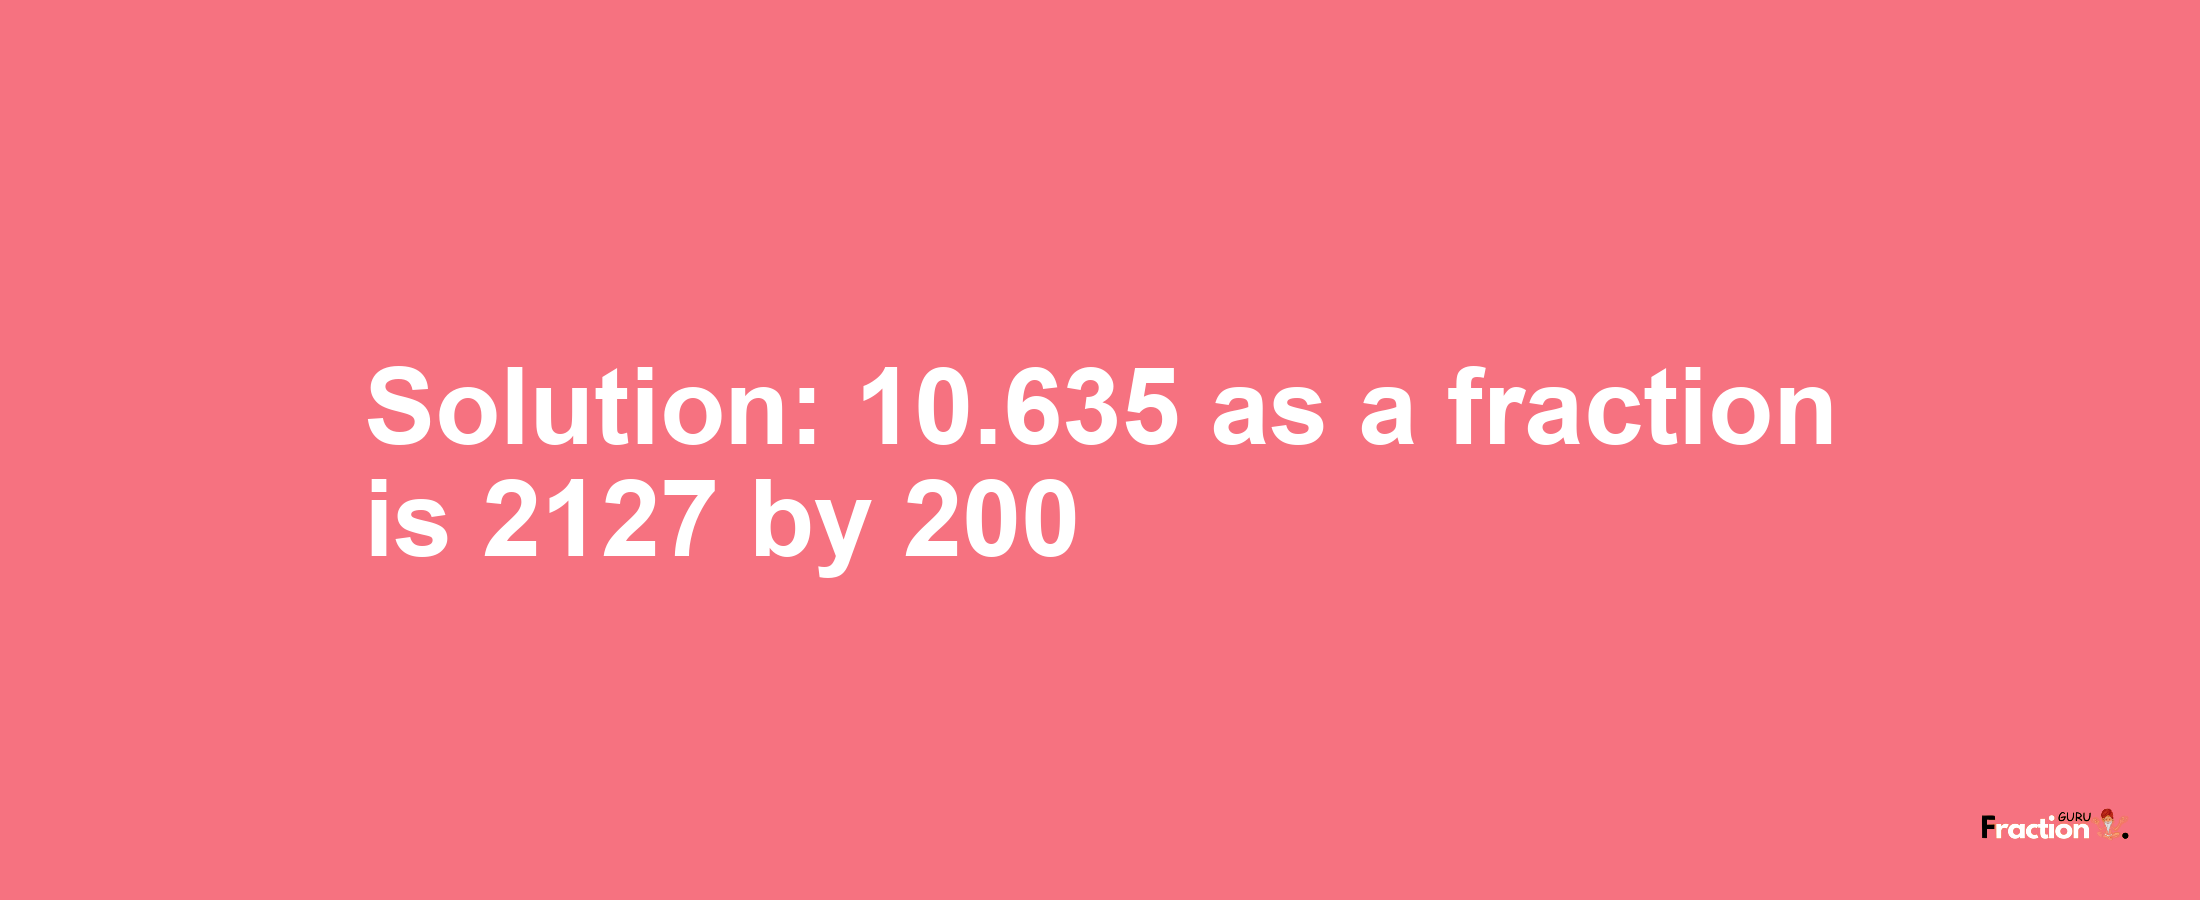 Solution:10.635 as a fraction is 2127/200